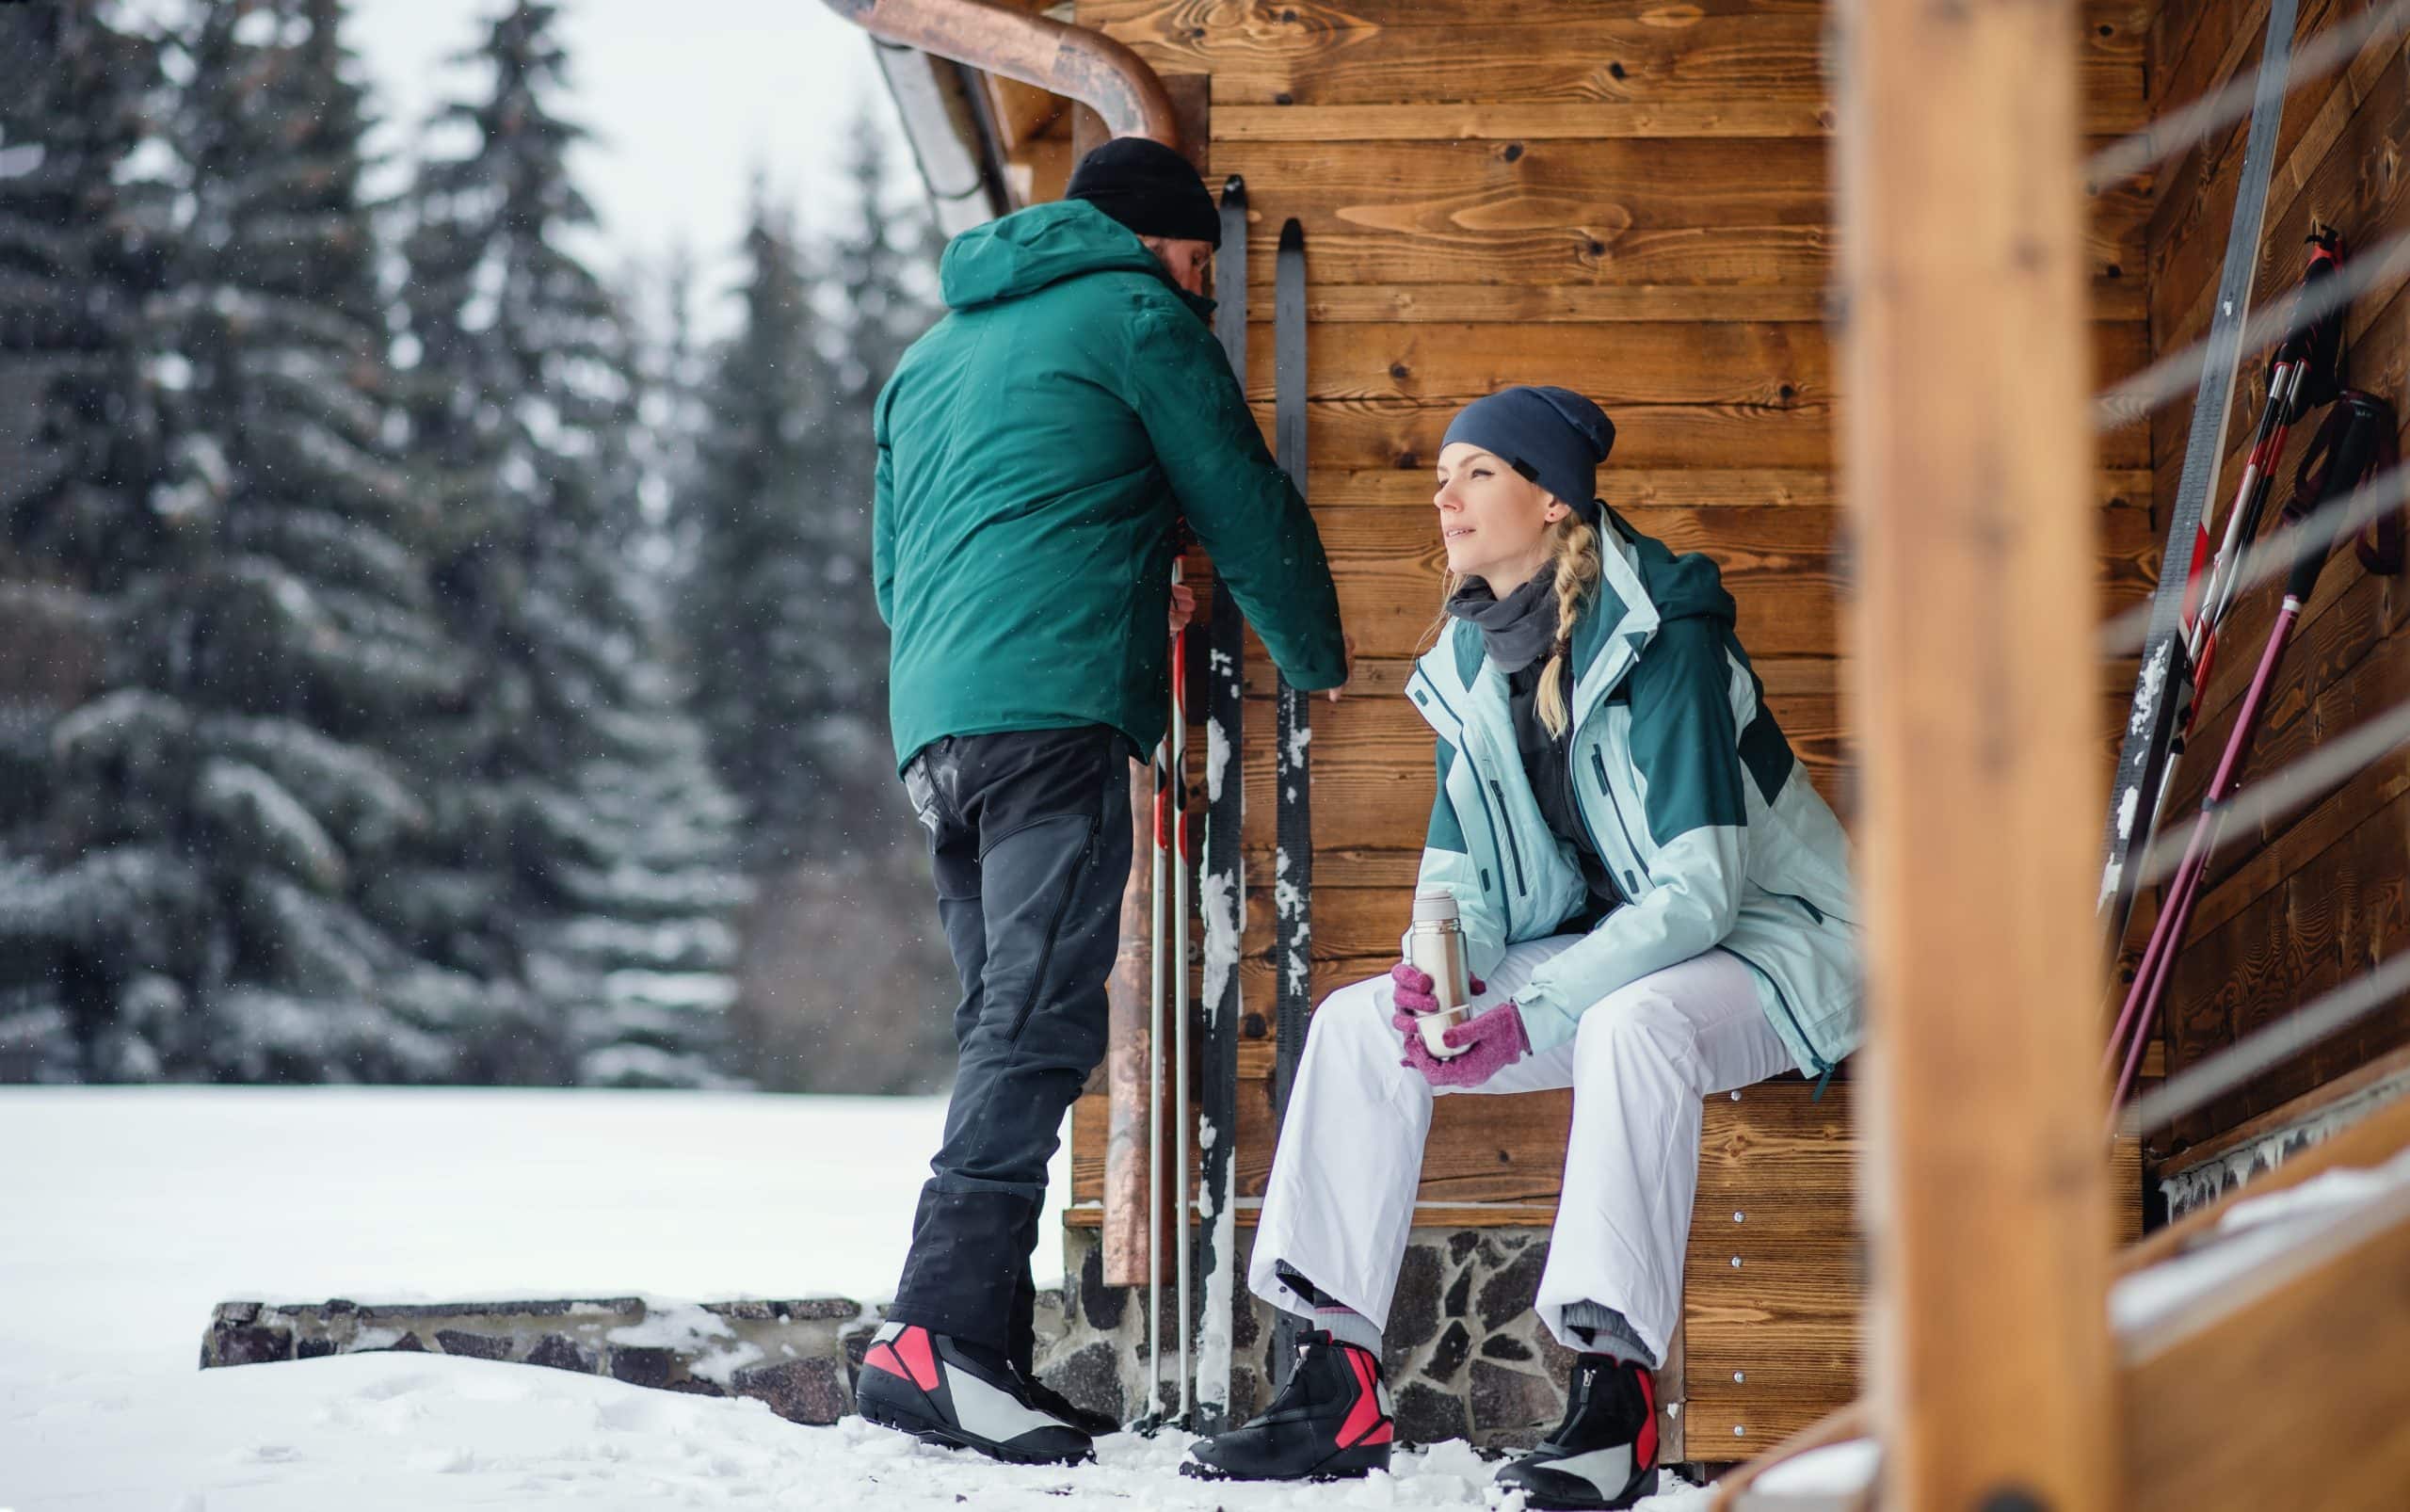 Bend ze knees,” to improve more than just your skiing